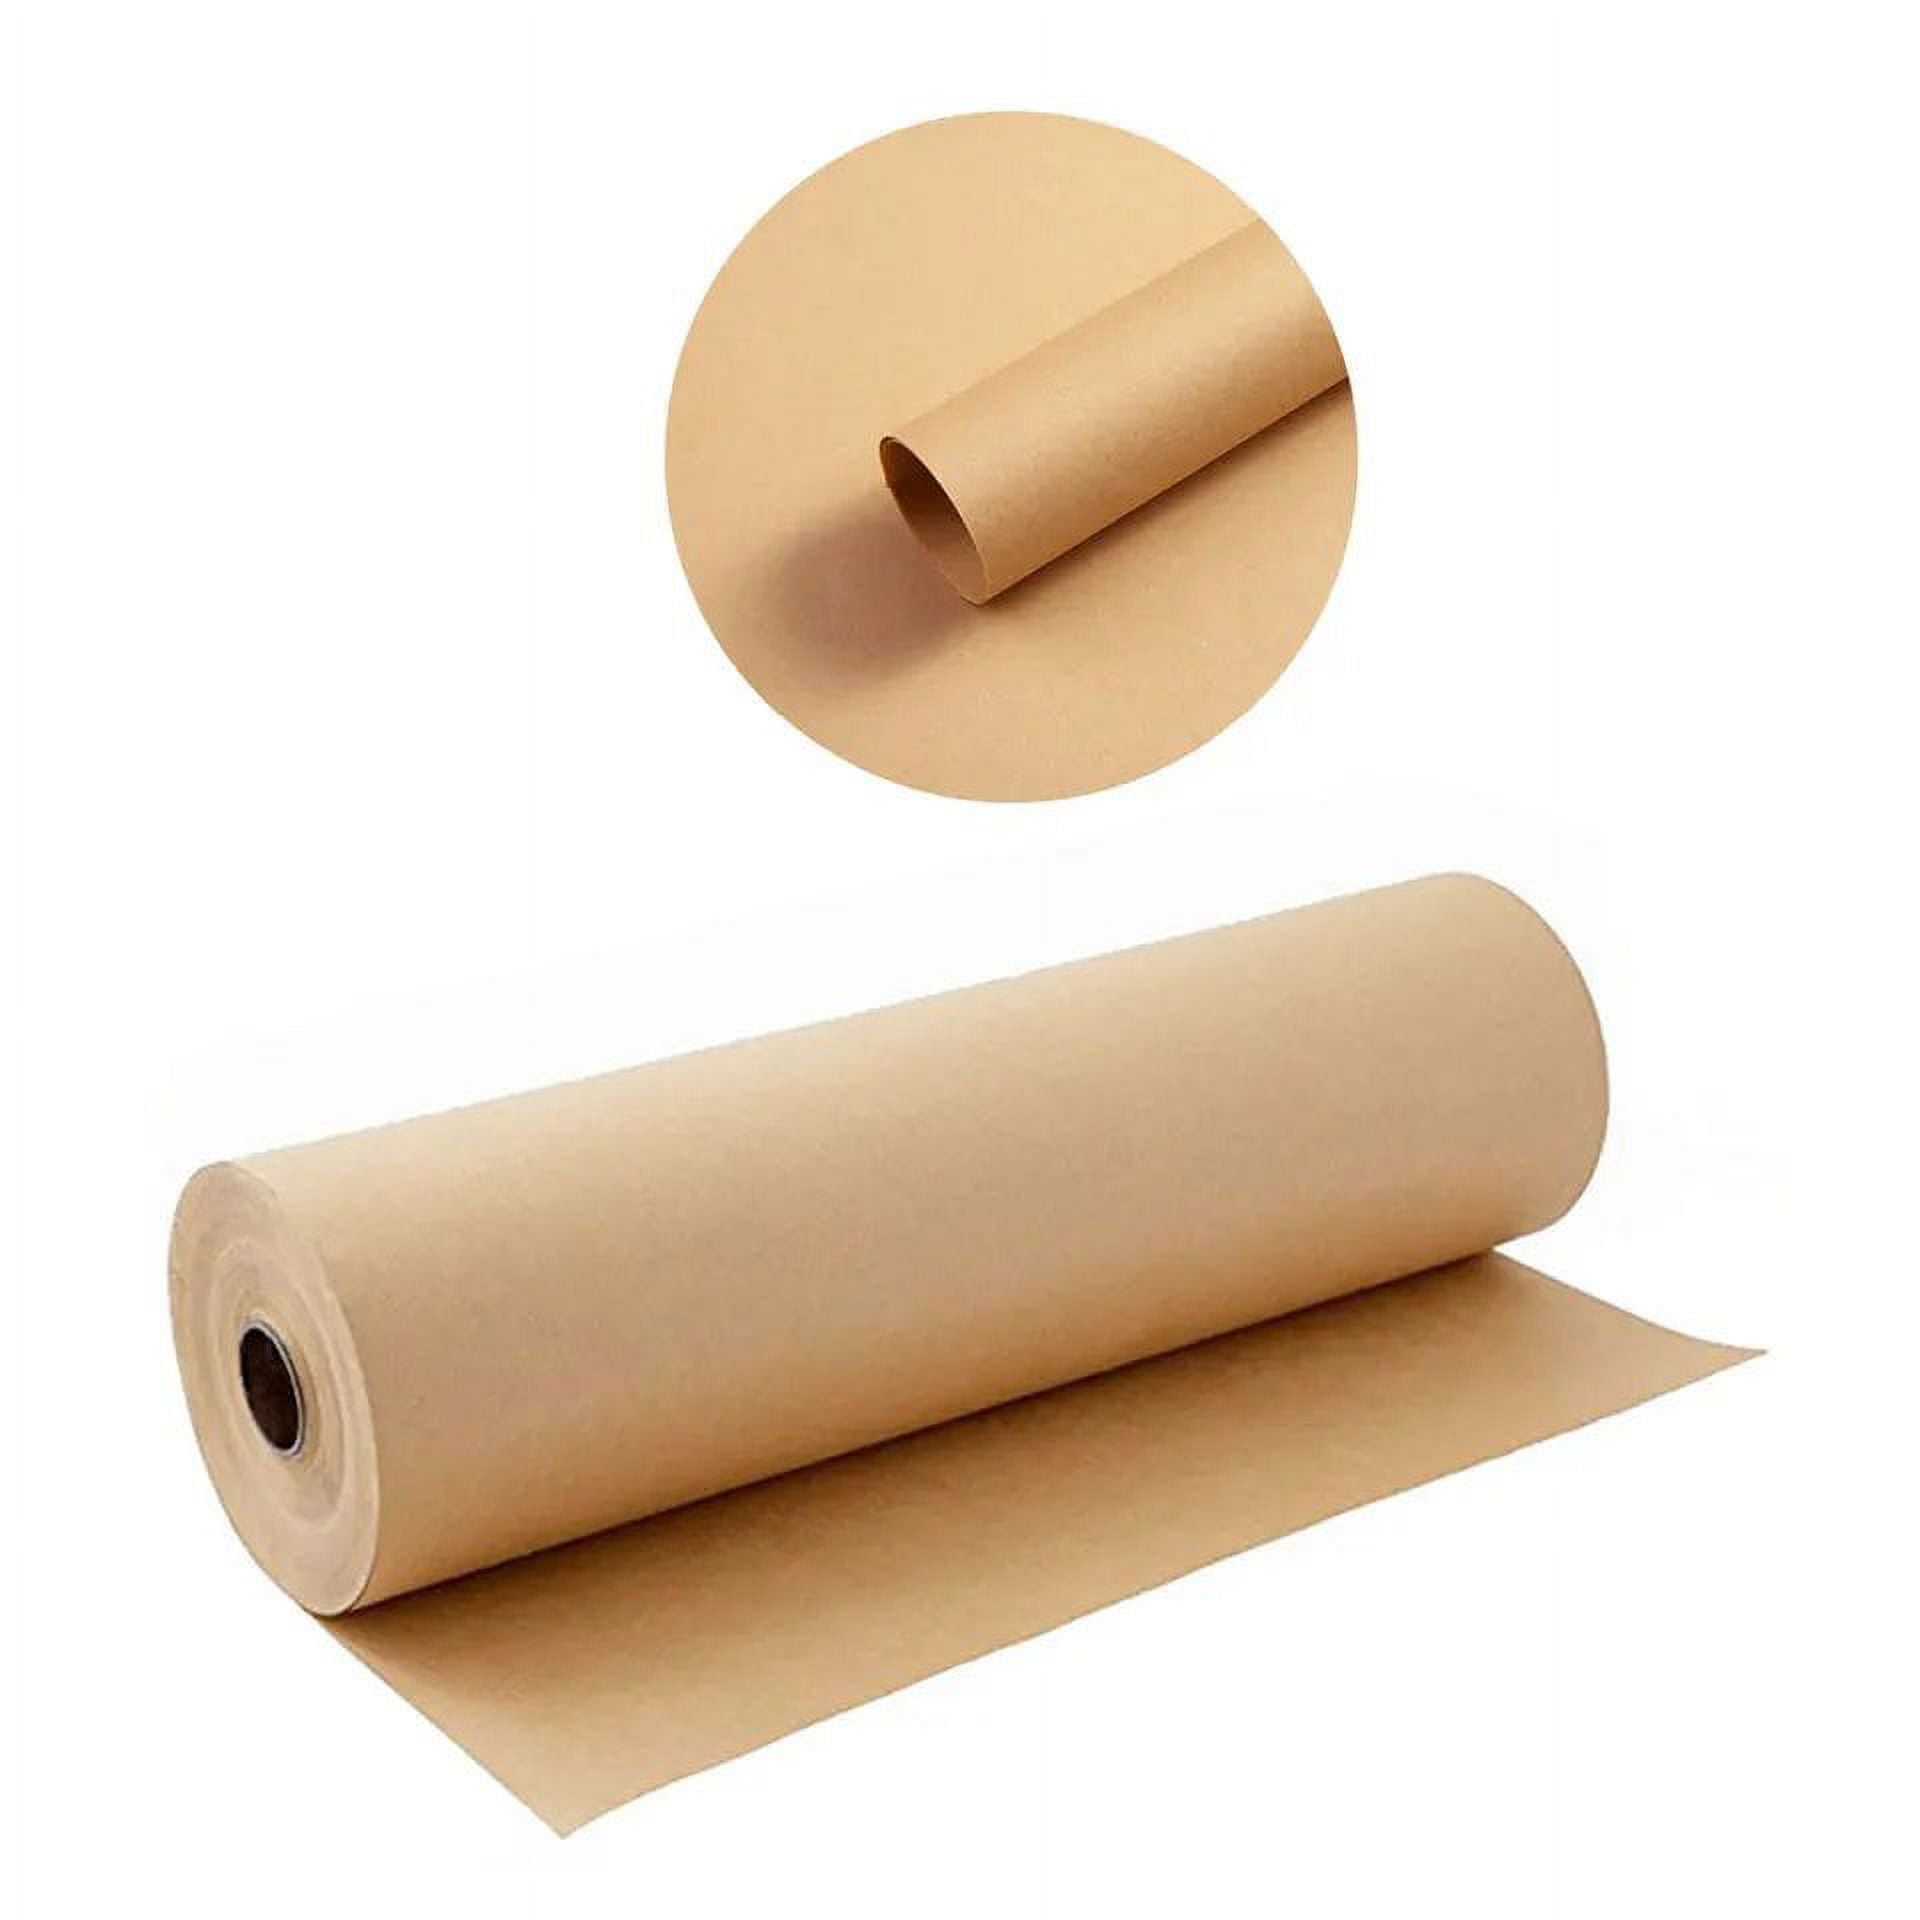 Void Fill 18 x 1200' 30# Brown Kraft Paper Roll for Shipping